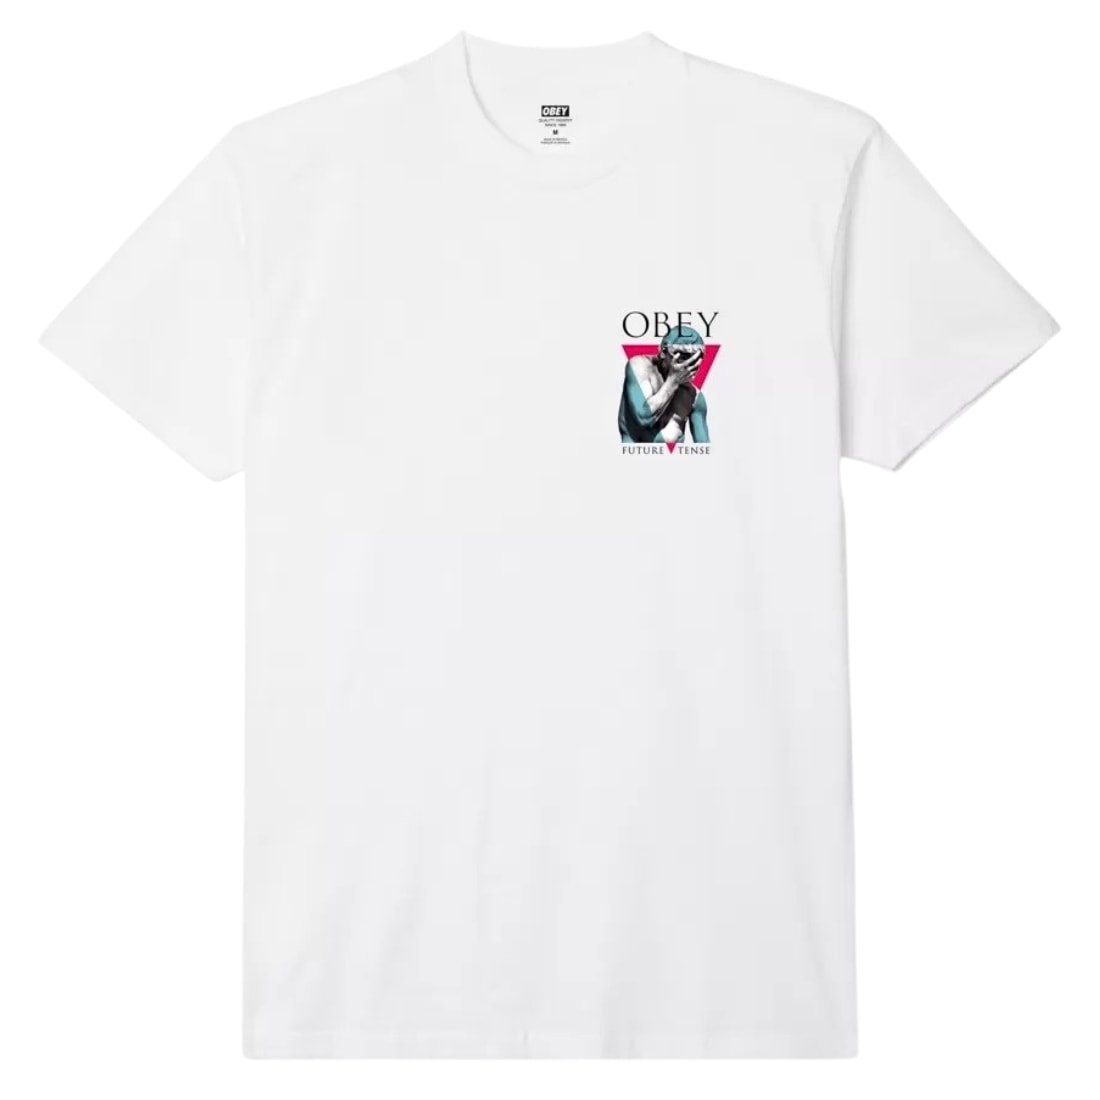 Obey Future Tense T-Shirt - White - Mens Graphic T-Shirt by Obey